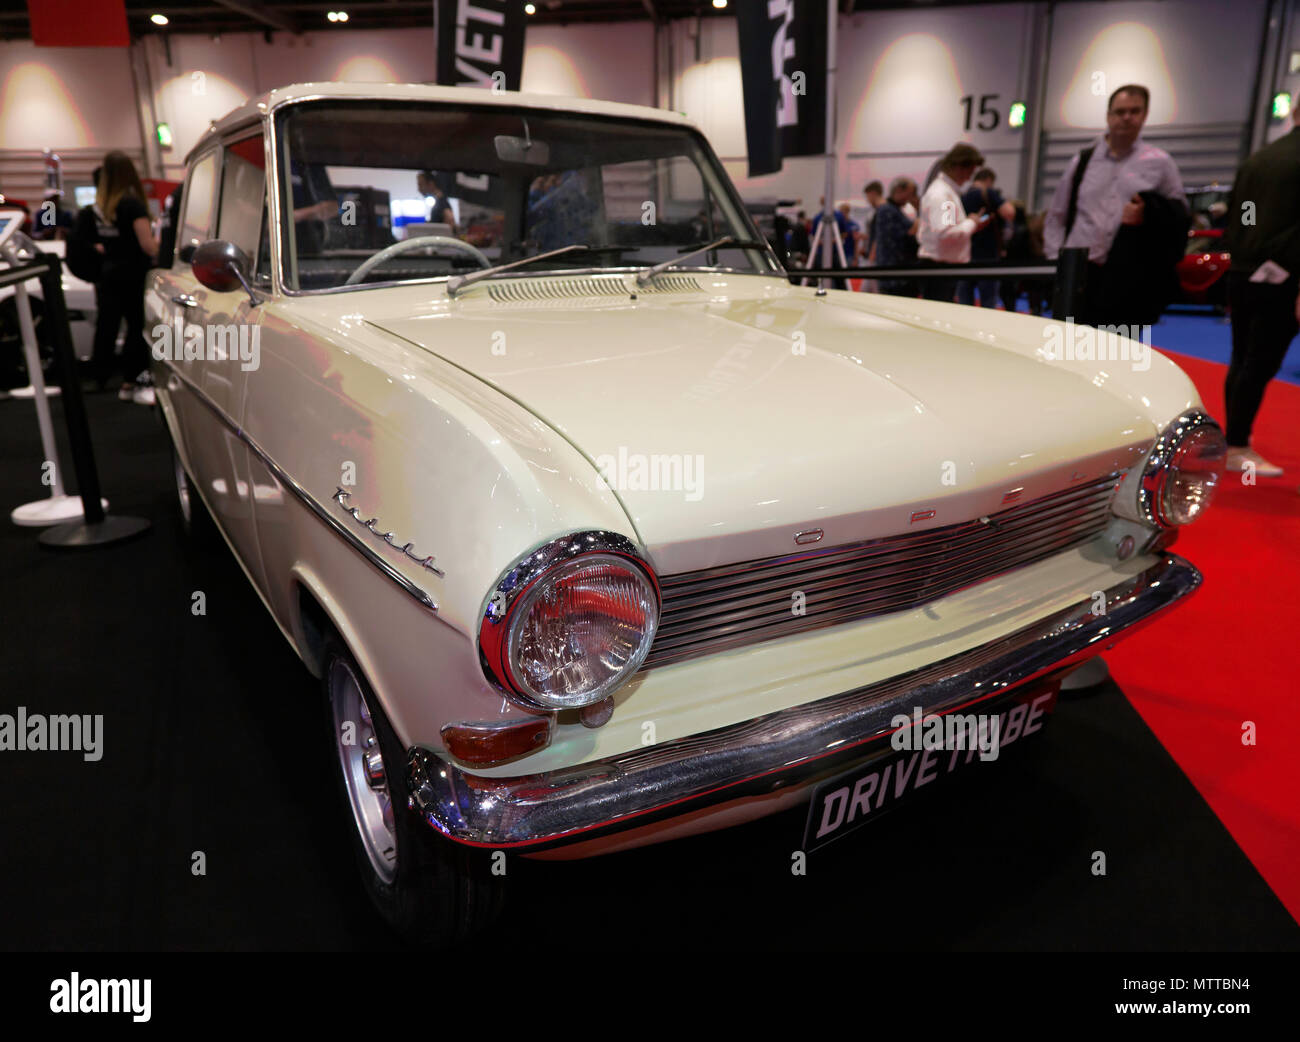 Richard Hammond's 1963 Opel Kadett which he drove in the Top Gear Botswana Special, on display at the DRIVETRIBE stand of the 2018 London Motor Show Stock Photo